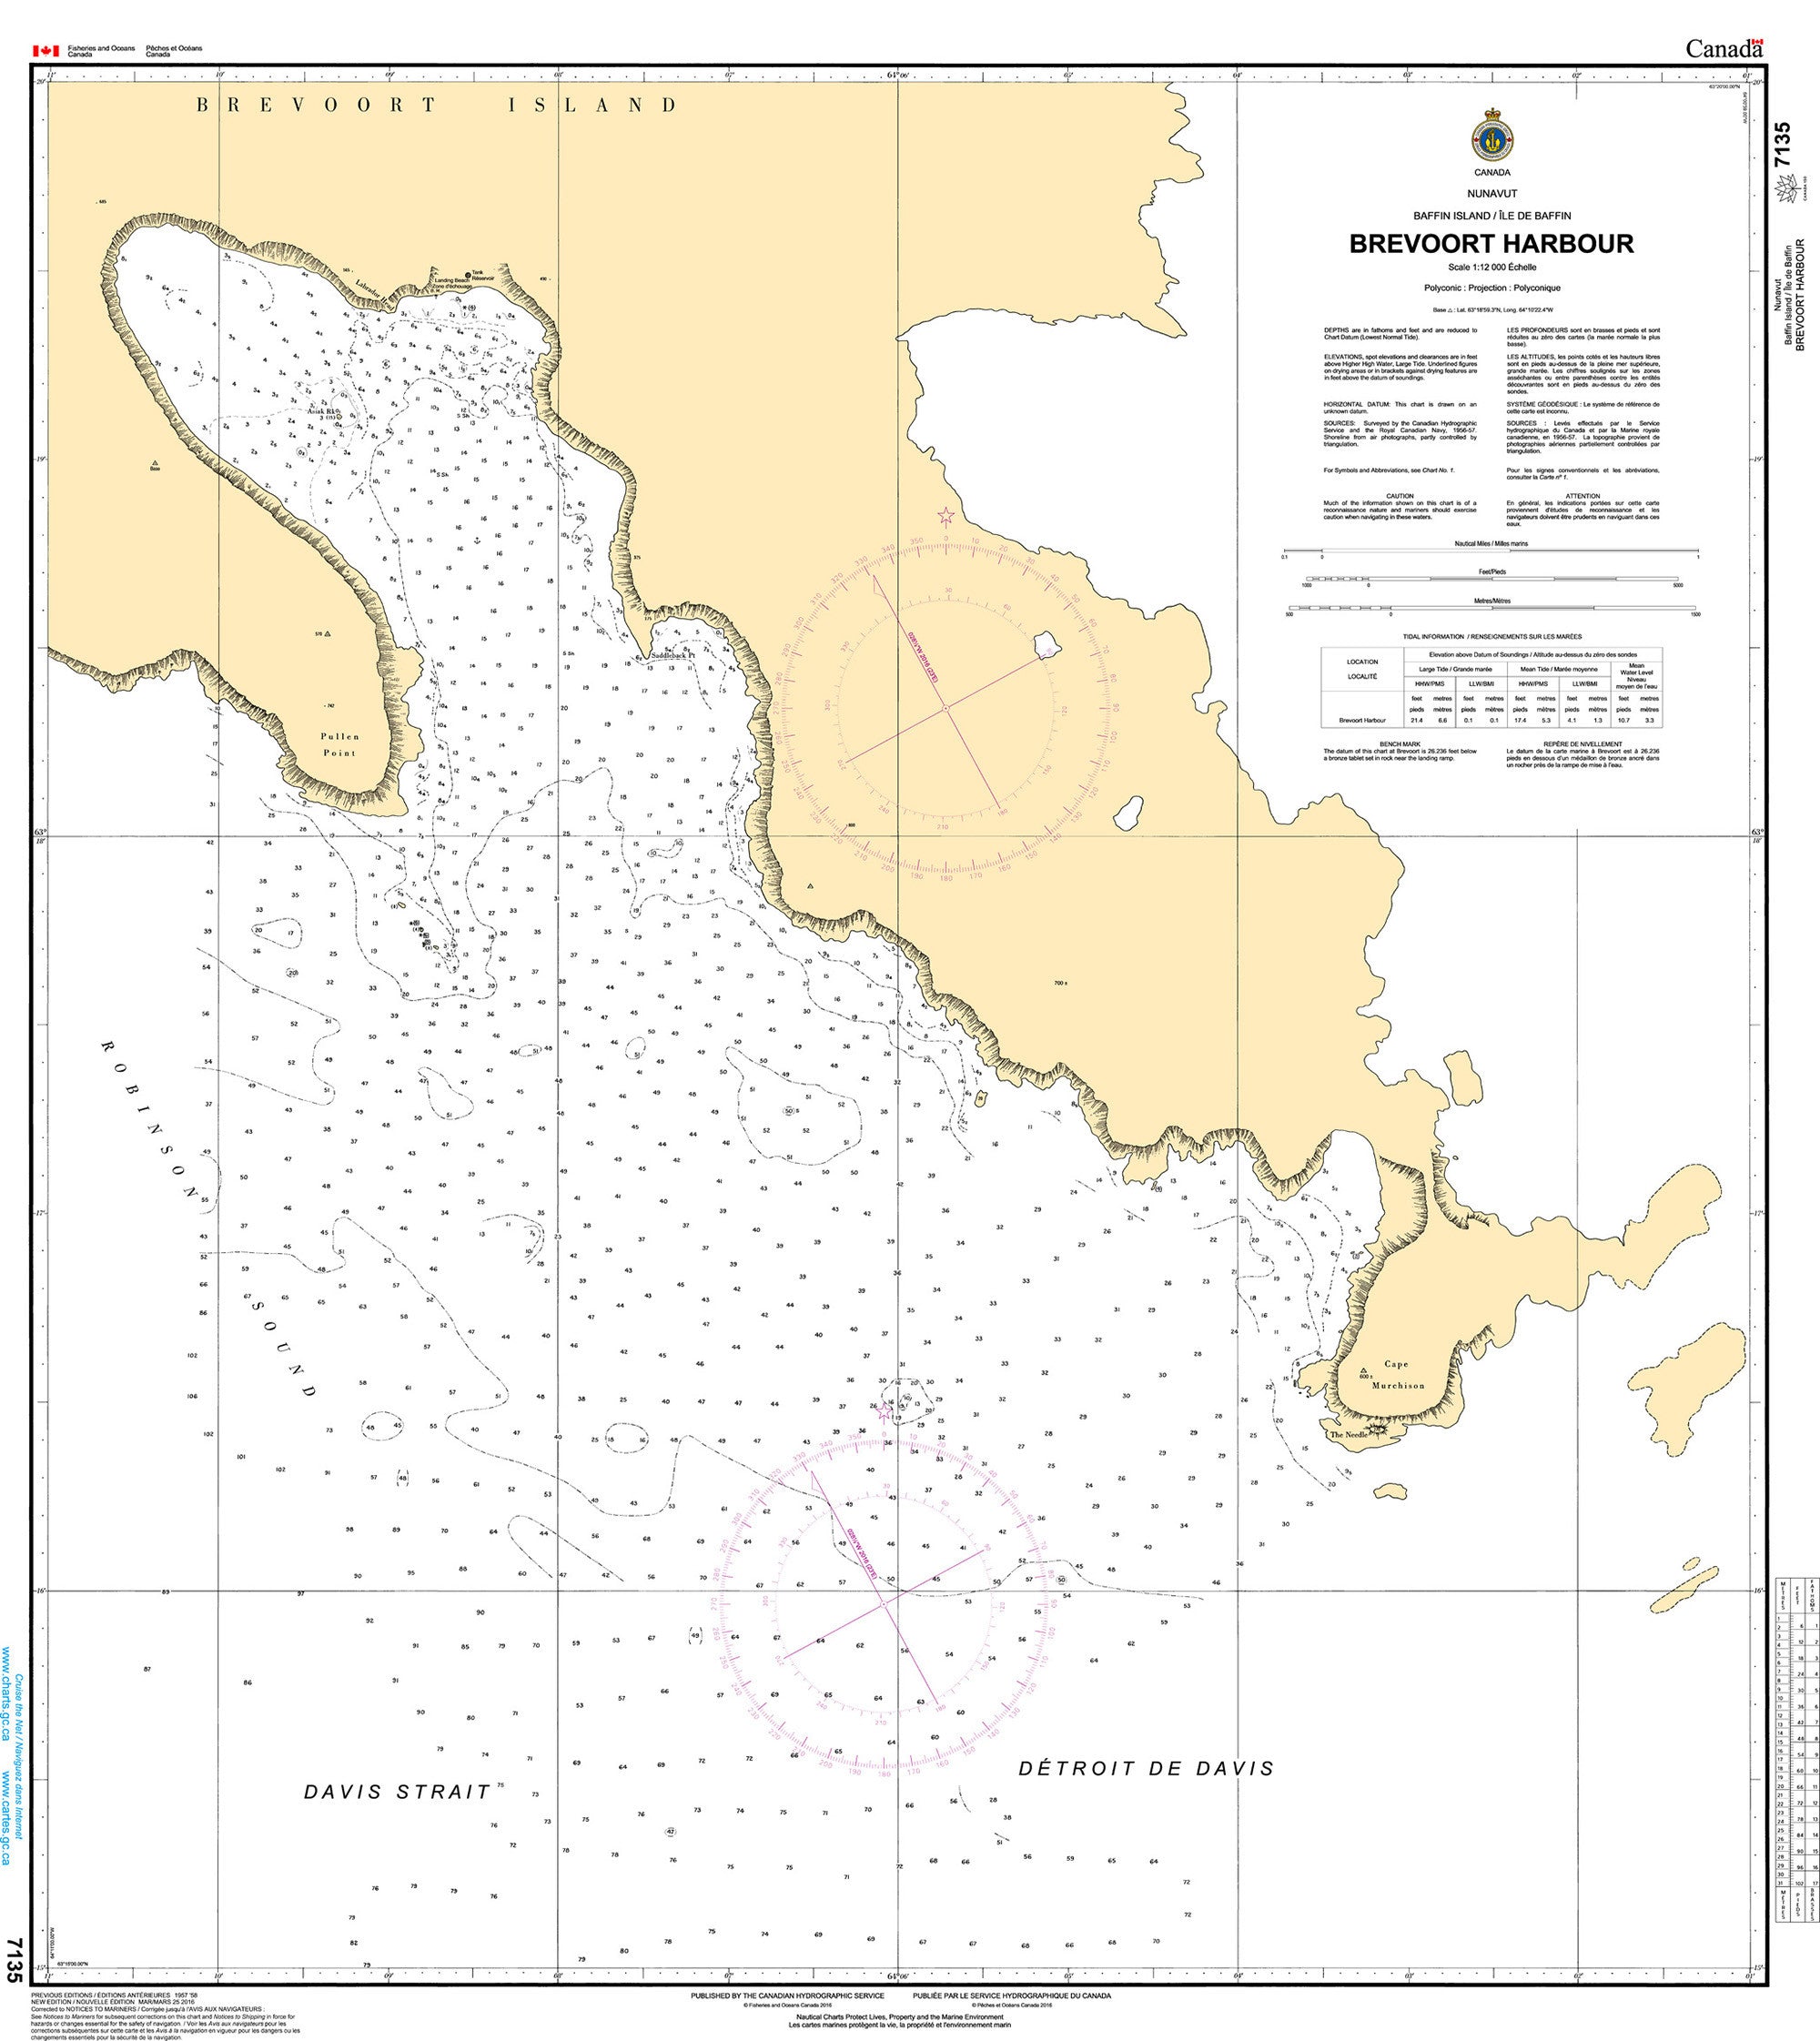 Canadian Hydrographic Service Nautical Chart CHS7135: Brevoort Harbour